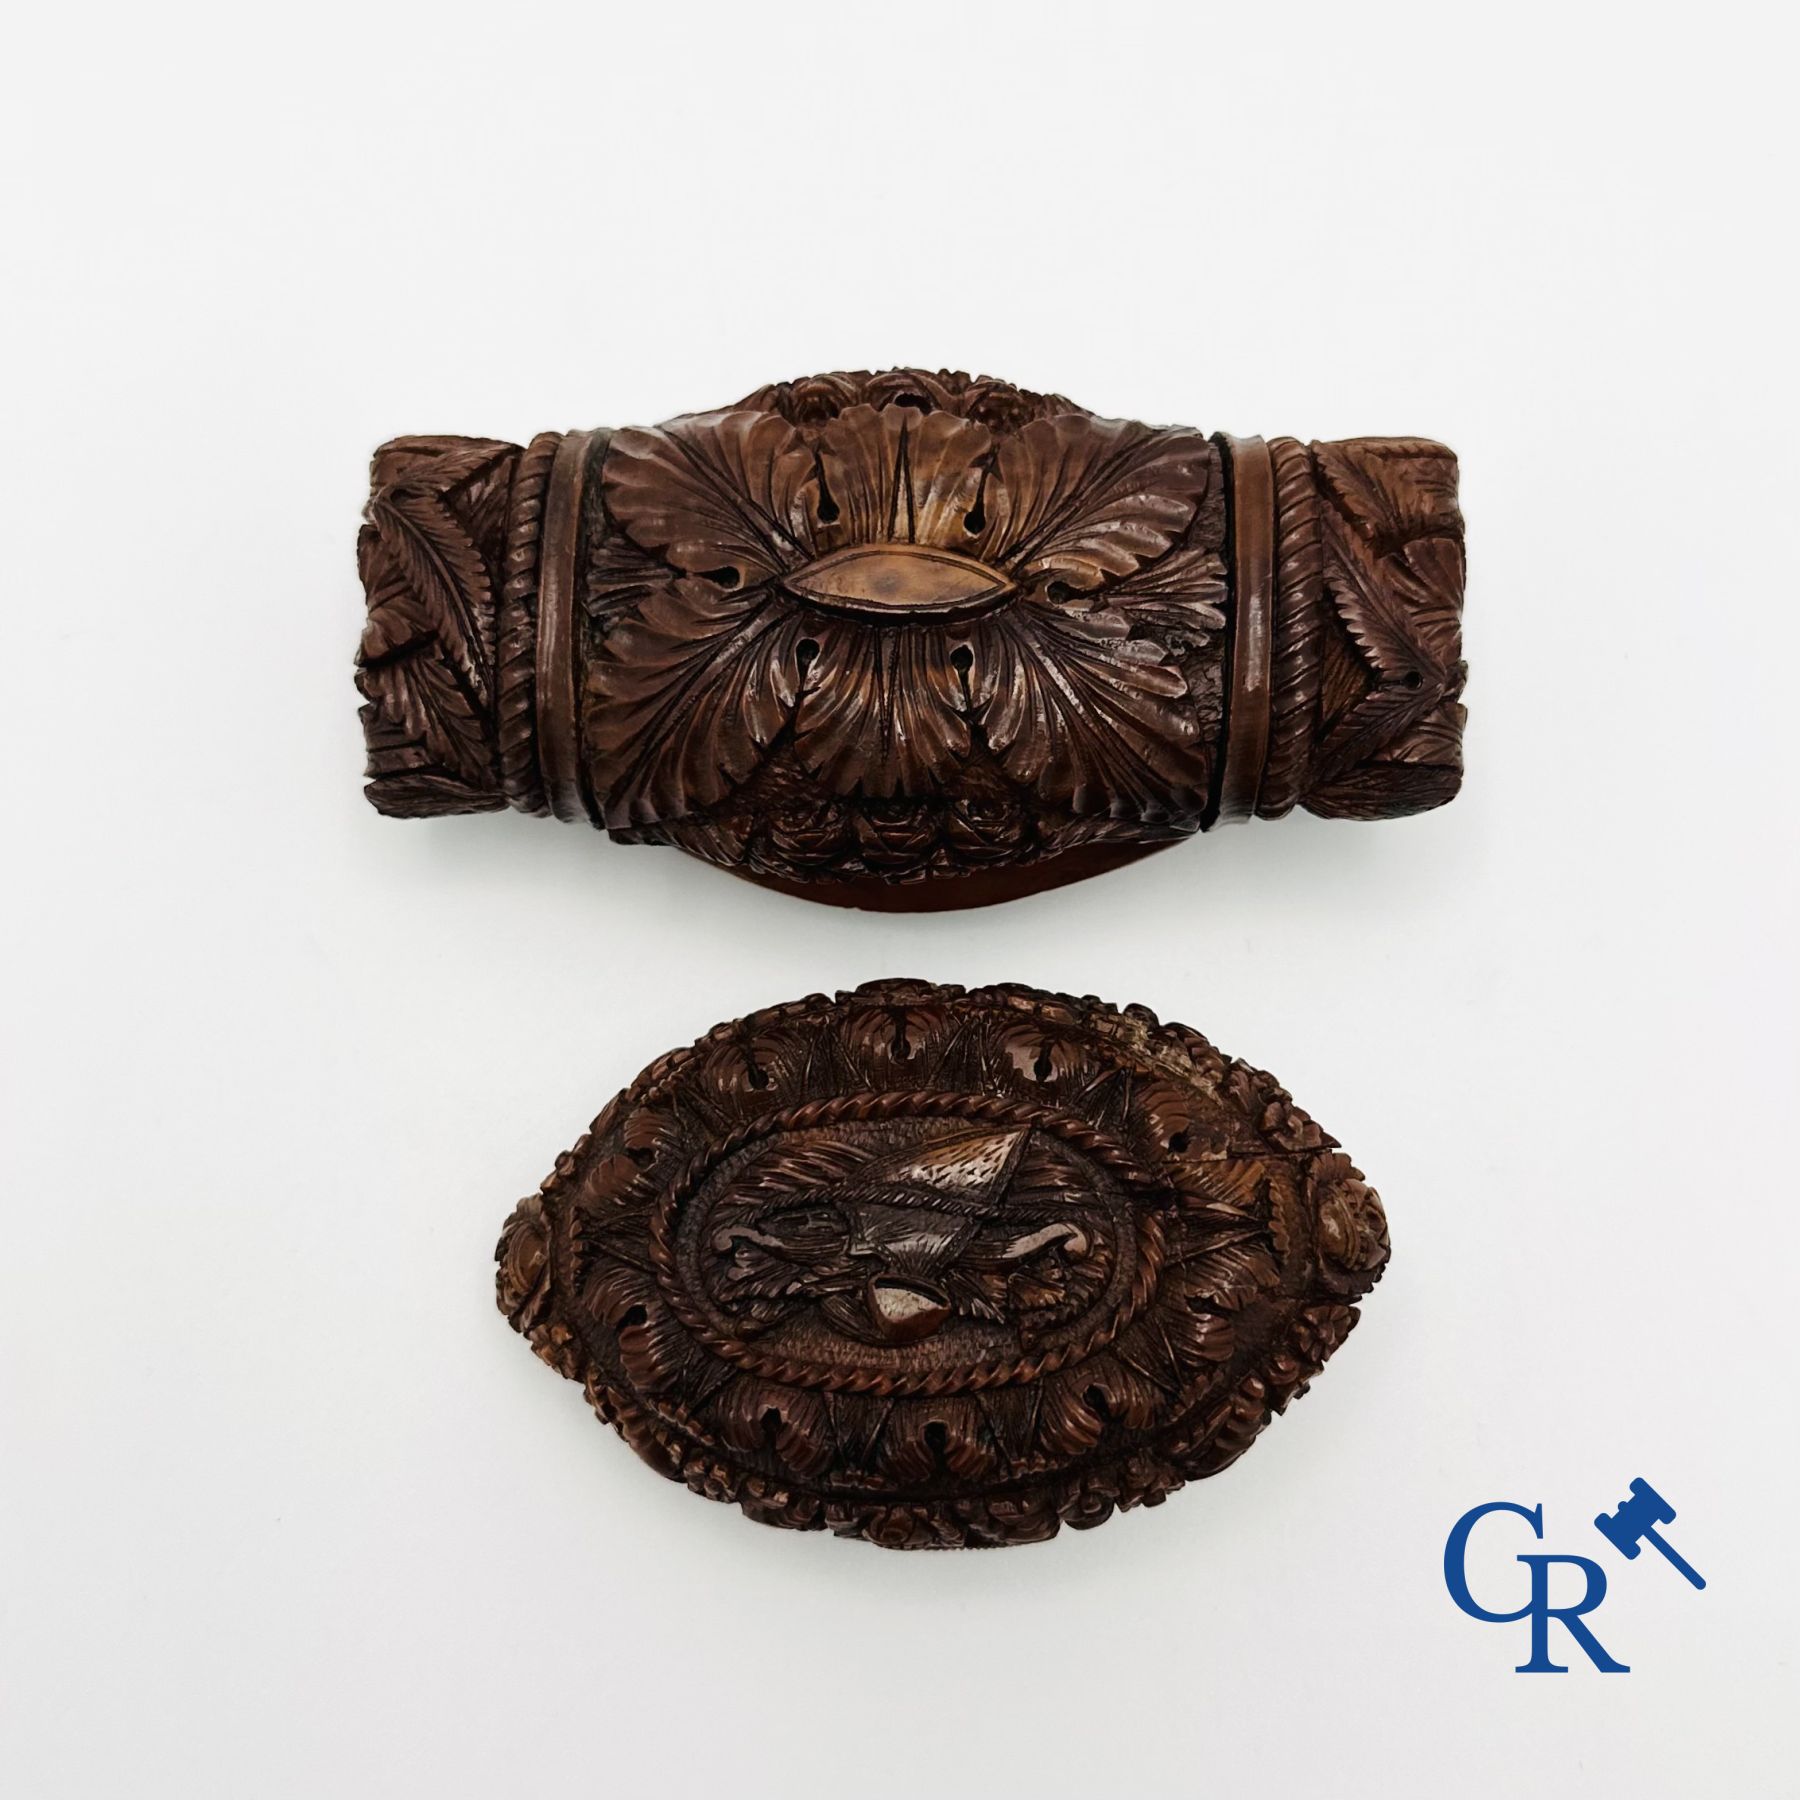 Display case objects: 2 pill boxes in sculpted corozo walnut. - Image 2 of 3